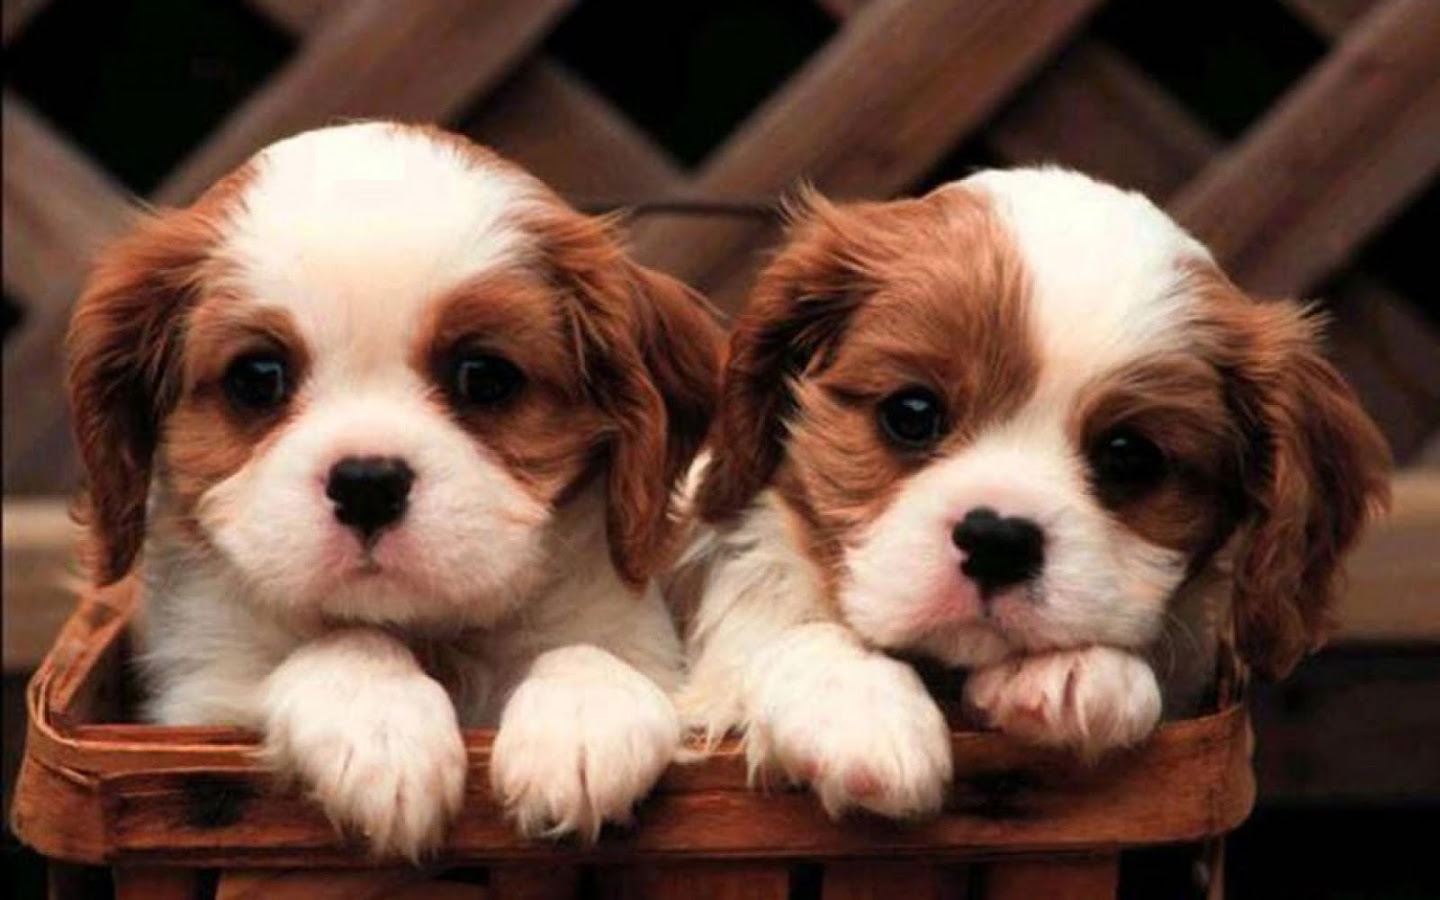 Puppy Dog Wallpaper - Android Apps on Google Play